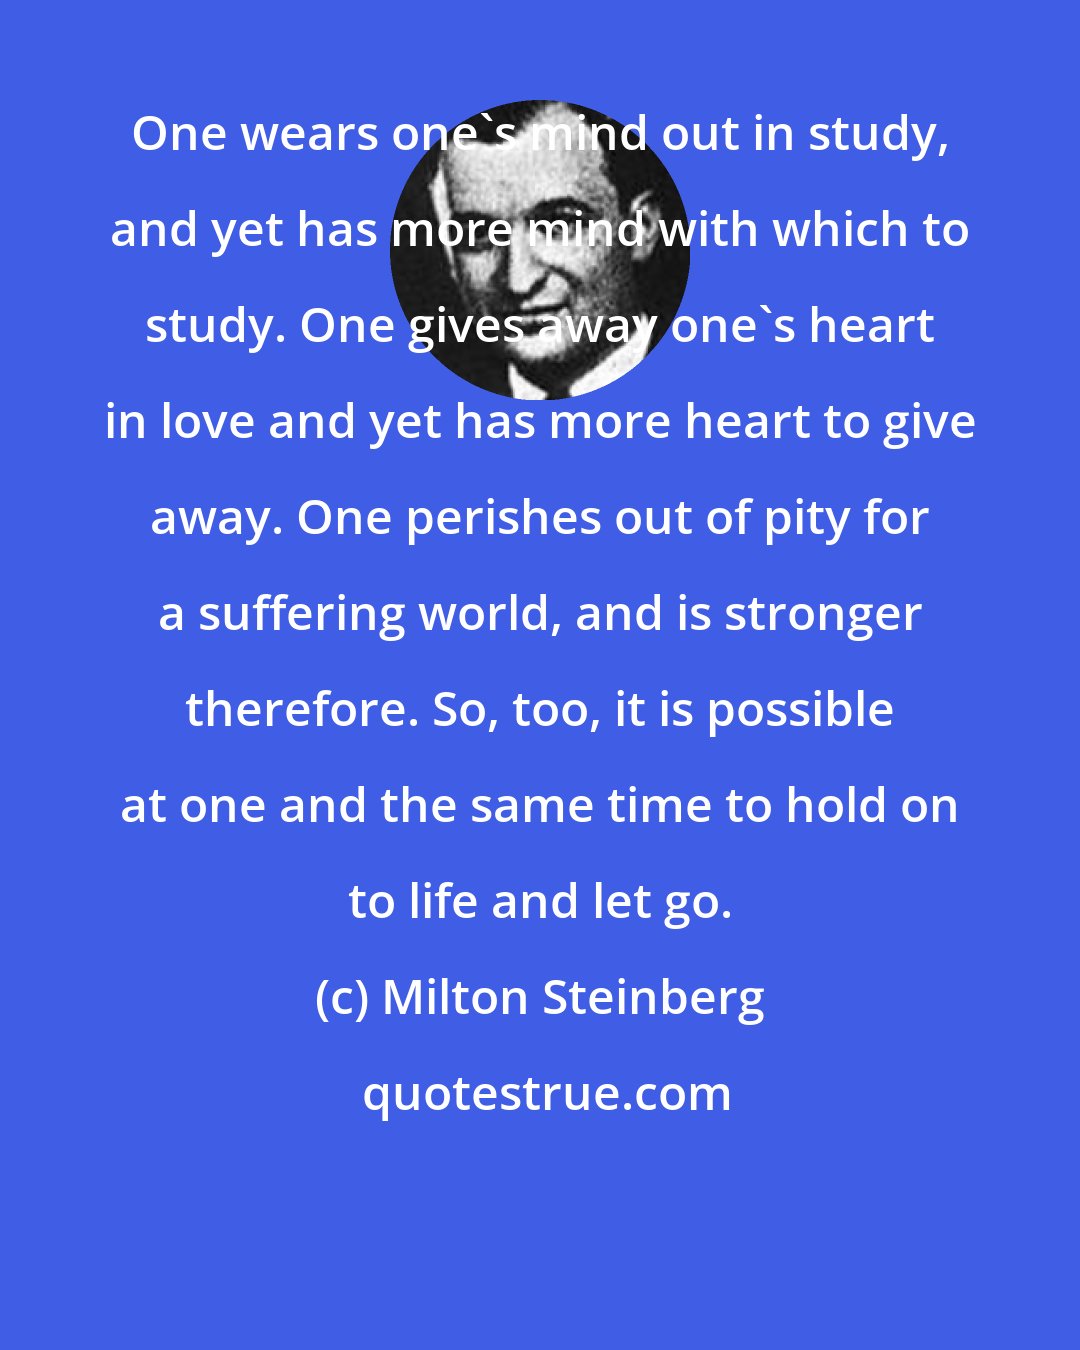 Milton Steinberg: One wears one's mind out in study, and yet has more mind with which to study. One gives away one's heart in love and yet has more heart to give away. One perishes out of pity for a suffering world, and is stronger therefore. So, too, it is possible at one and the same time to hold on to life and let go.